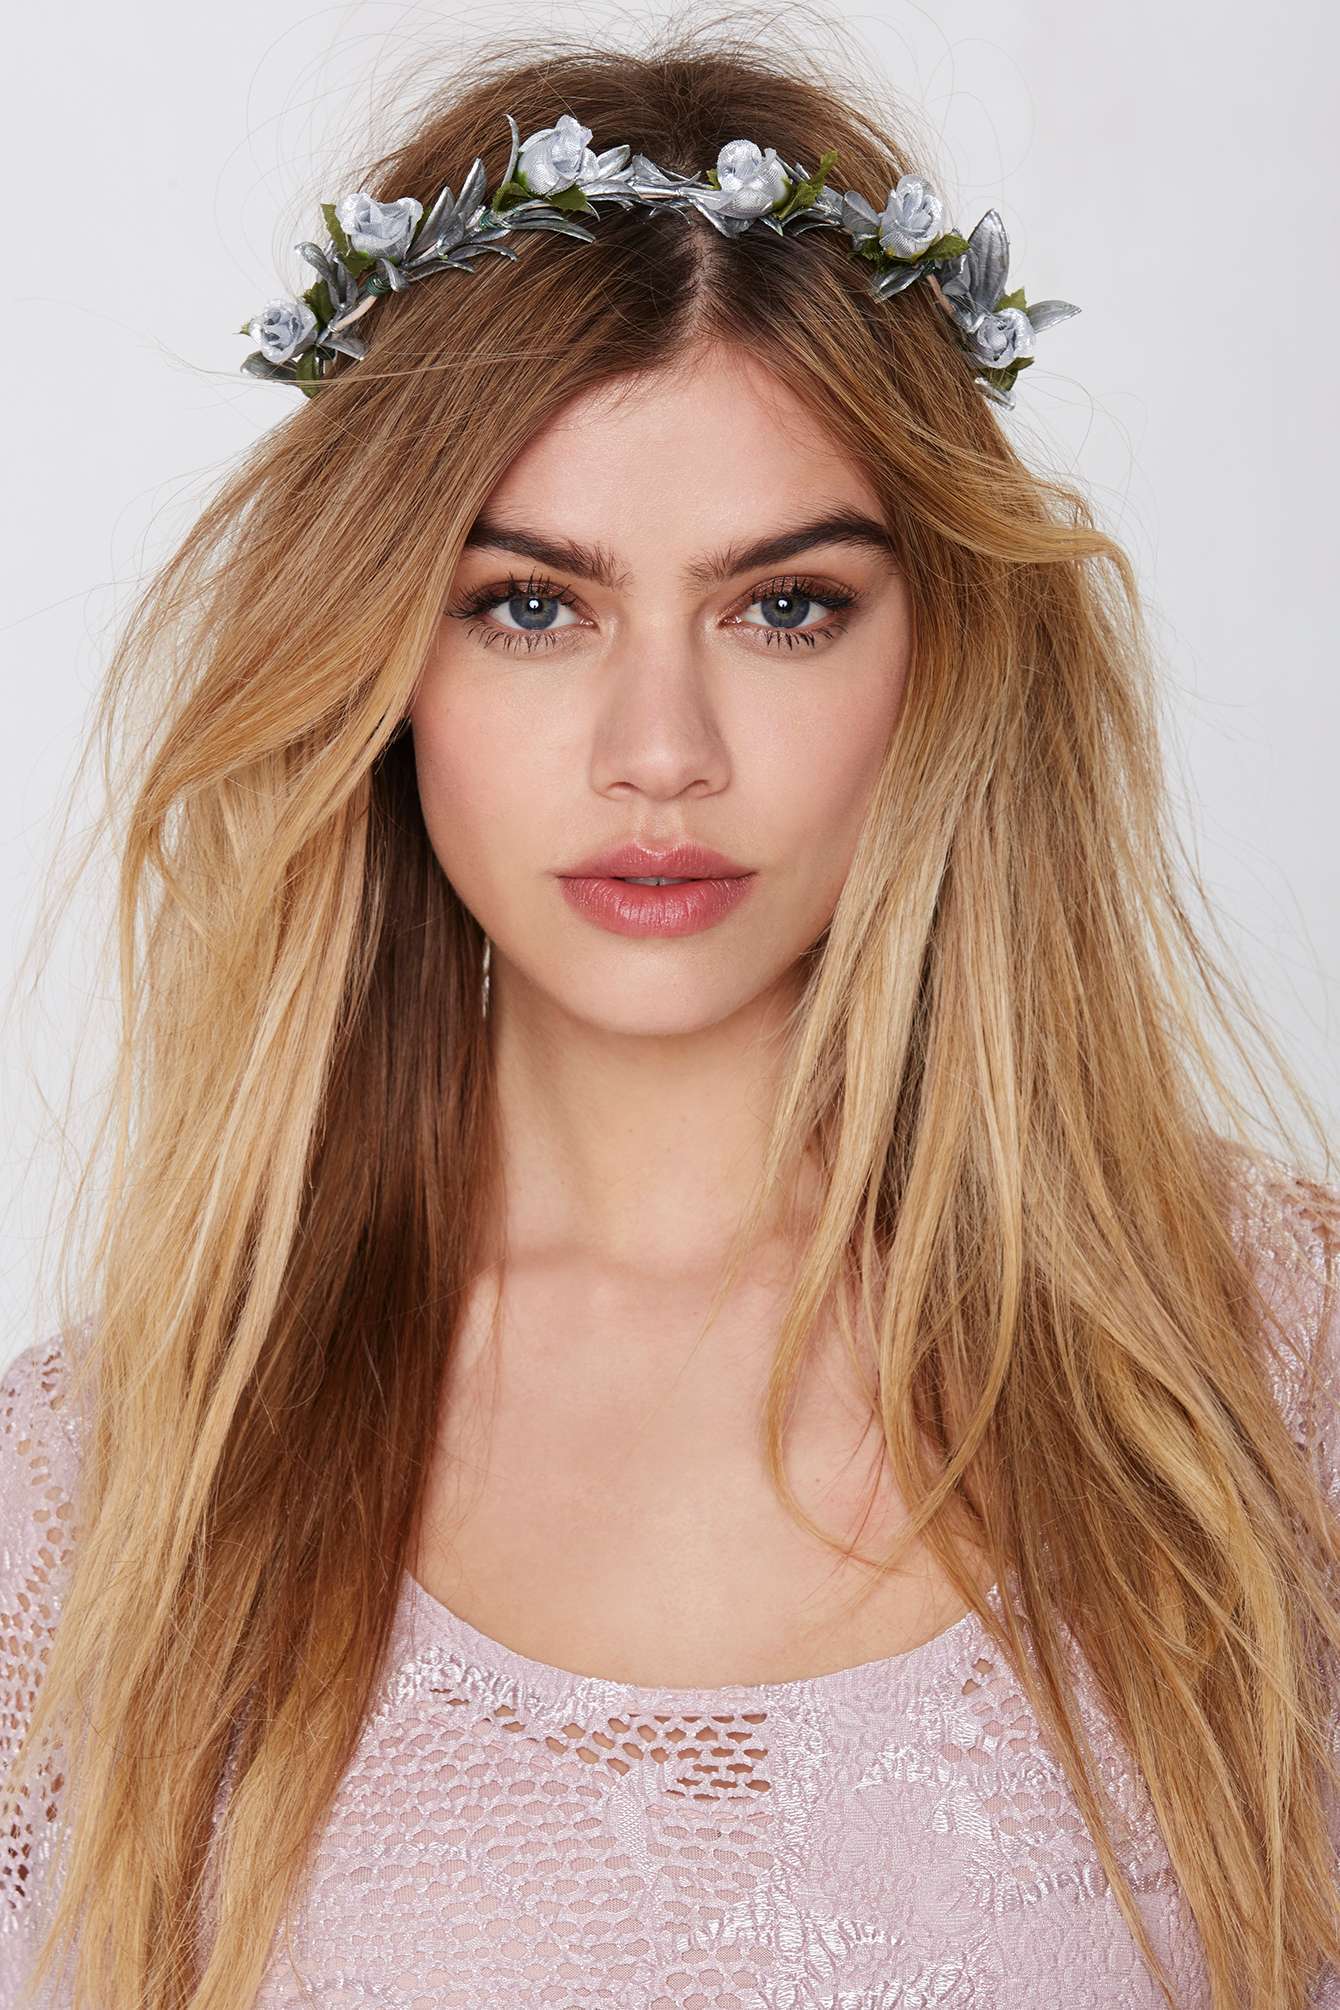 12 Flower Crowns To Wear To Celebrate The 70s Style Resurgence